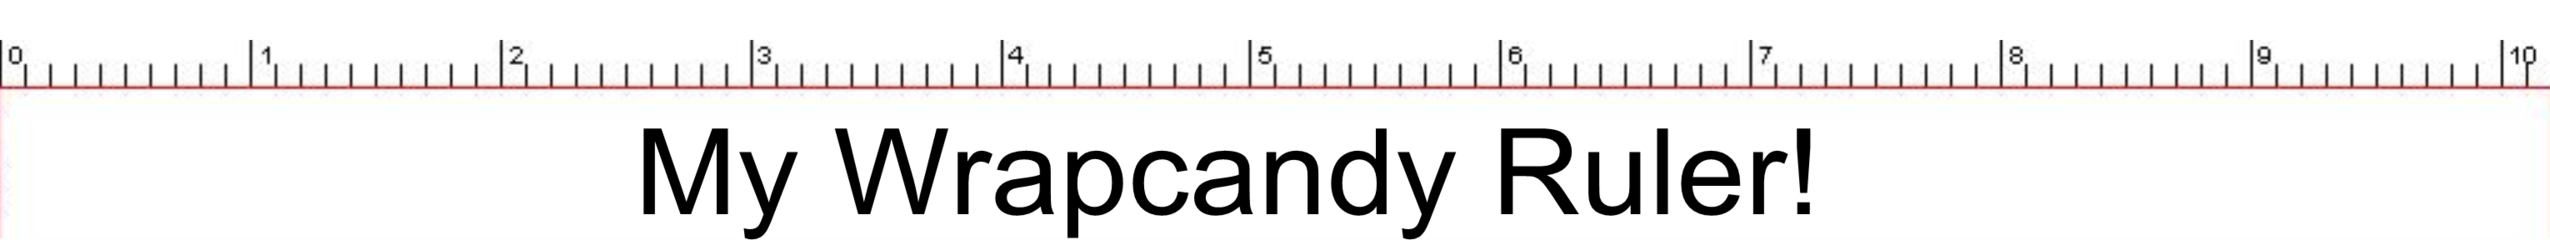 wrapcandy ruler 1_tenths.png